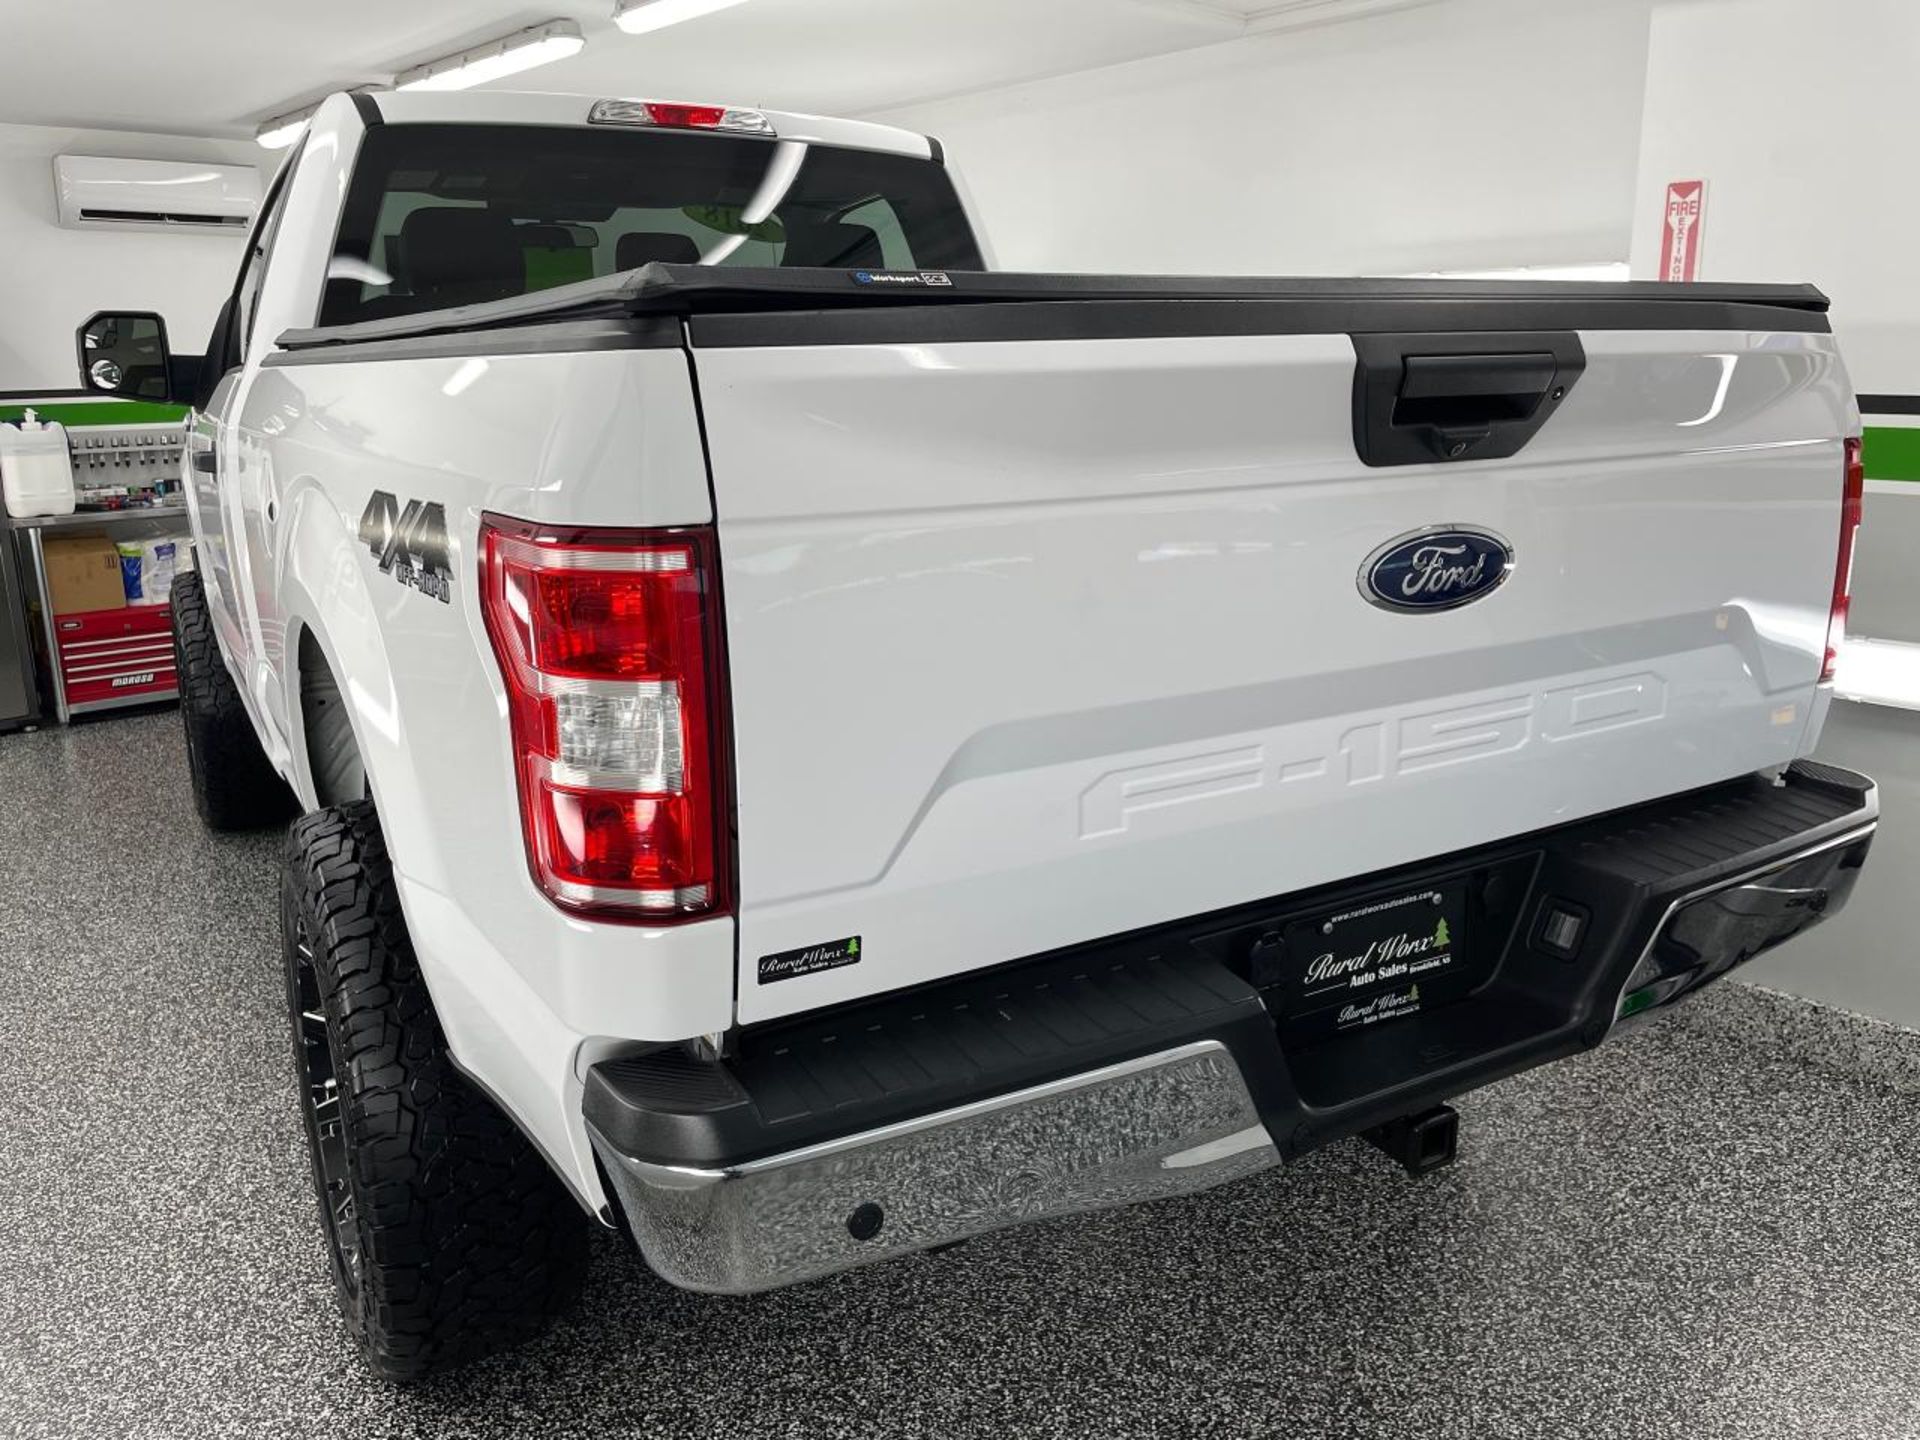 2018 FORD F-150 XLT (SHORTY) - Image 3 of 9